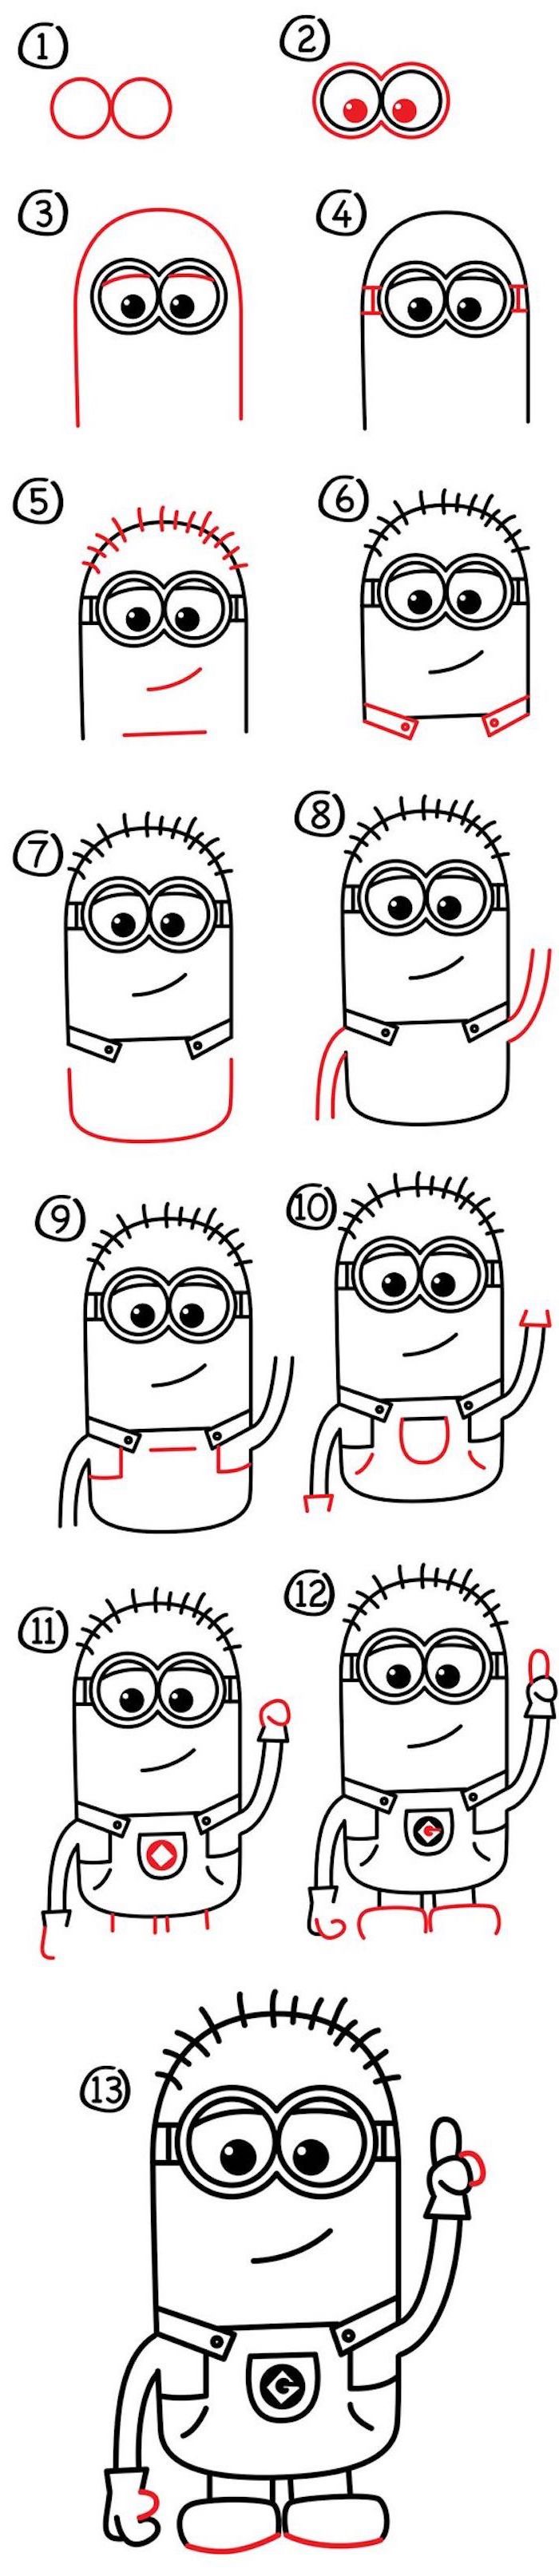 step by step diy tutorial, how to draw a minion, cute and easy drawings, white background